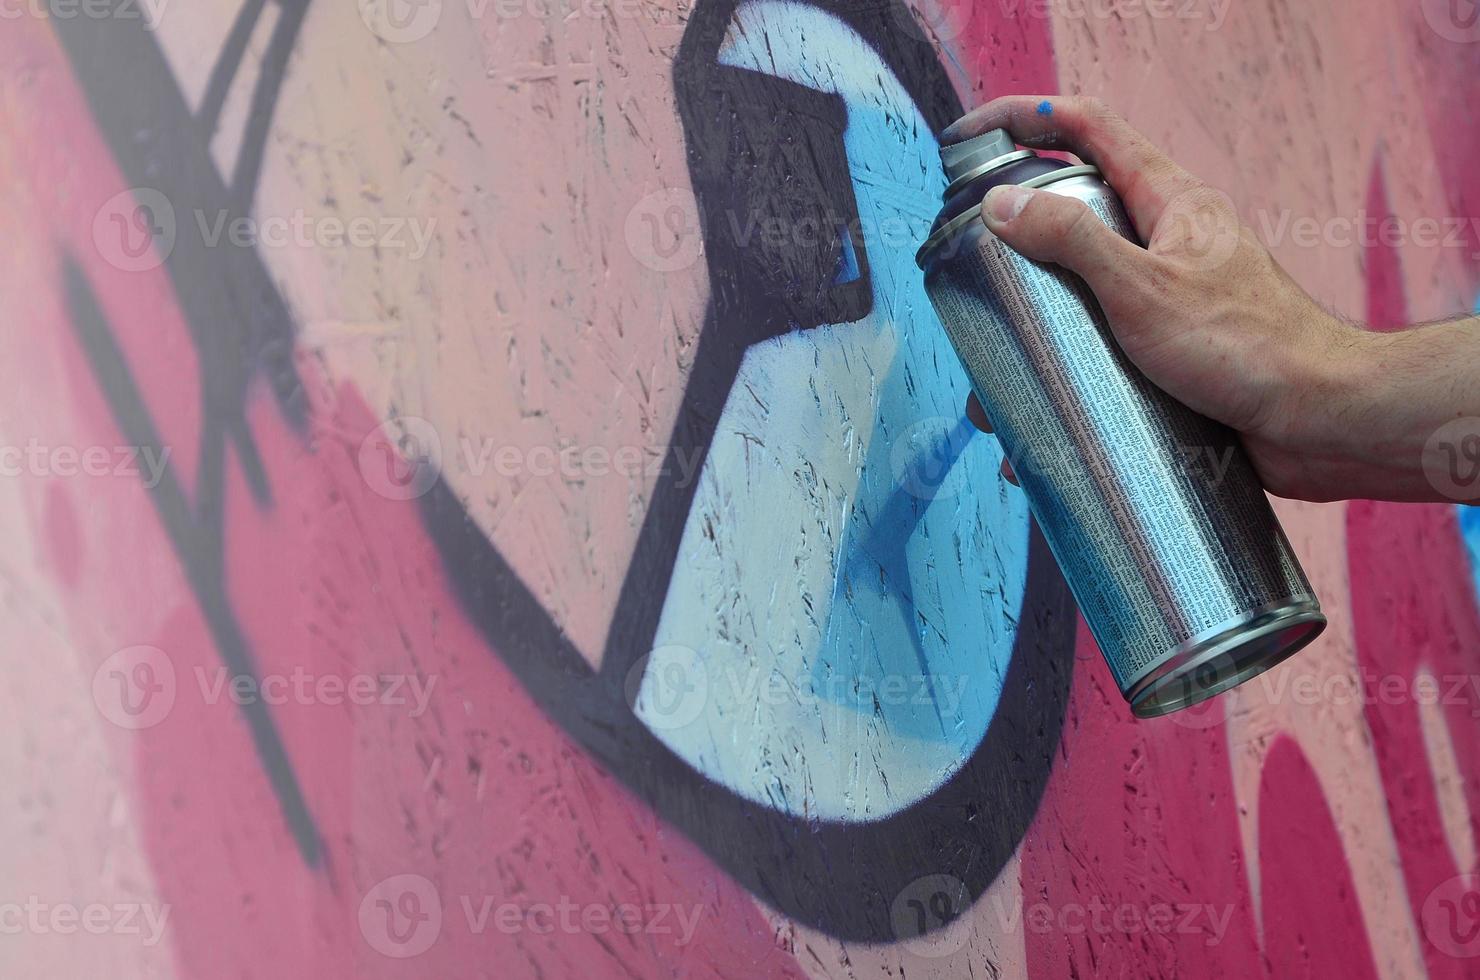 A hand with a spray can that draws a new graffiti on the wall. Photo of the process of drawing a graffiti on a wooden wall close-up. The concept of street art and illegal vandalism